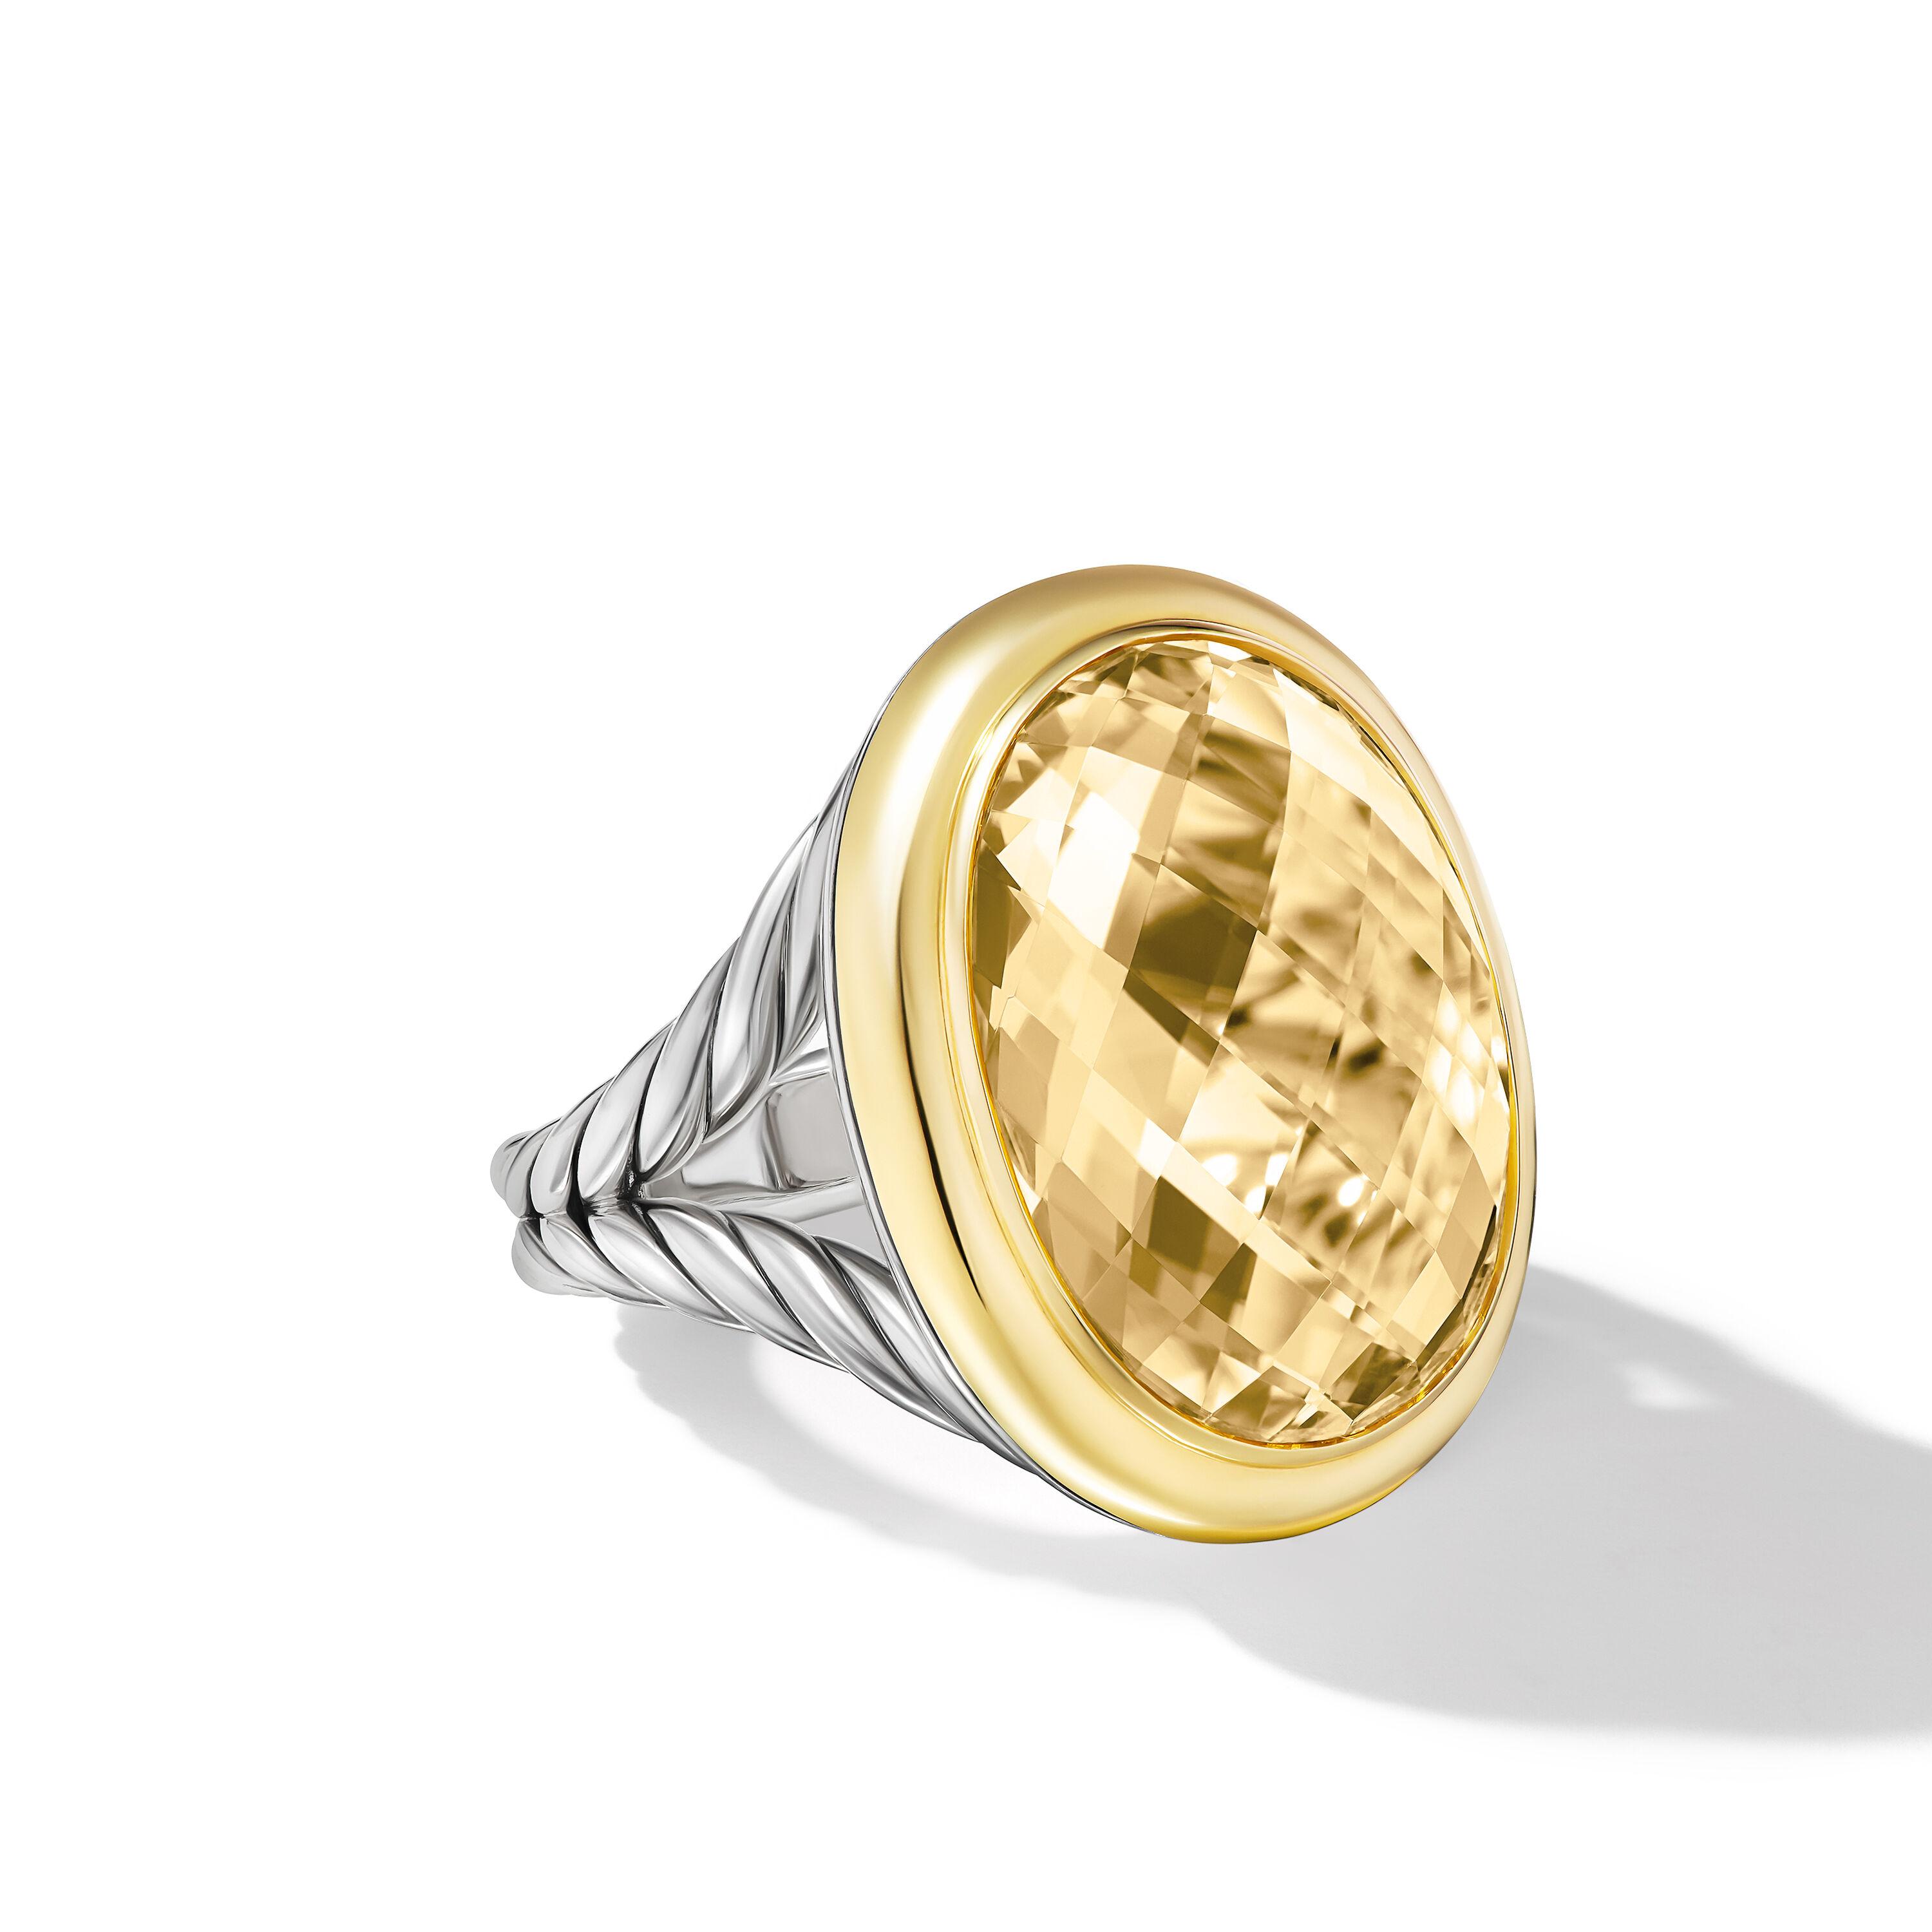 David Yurman Albion Oval Ring in Sterling Silver with 18K Yellow Gold and Champagne Citrine 0